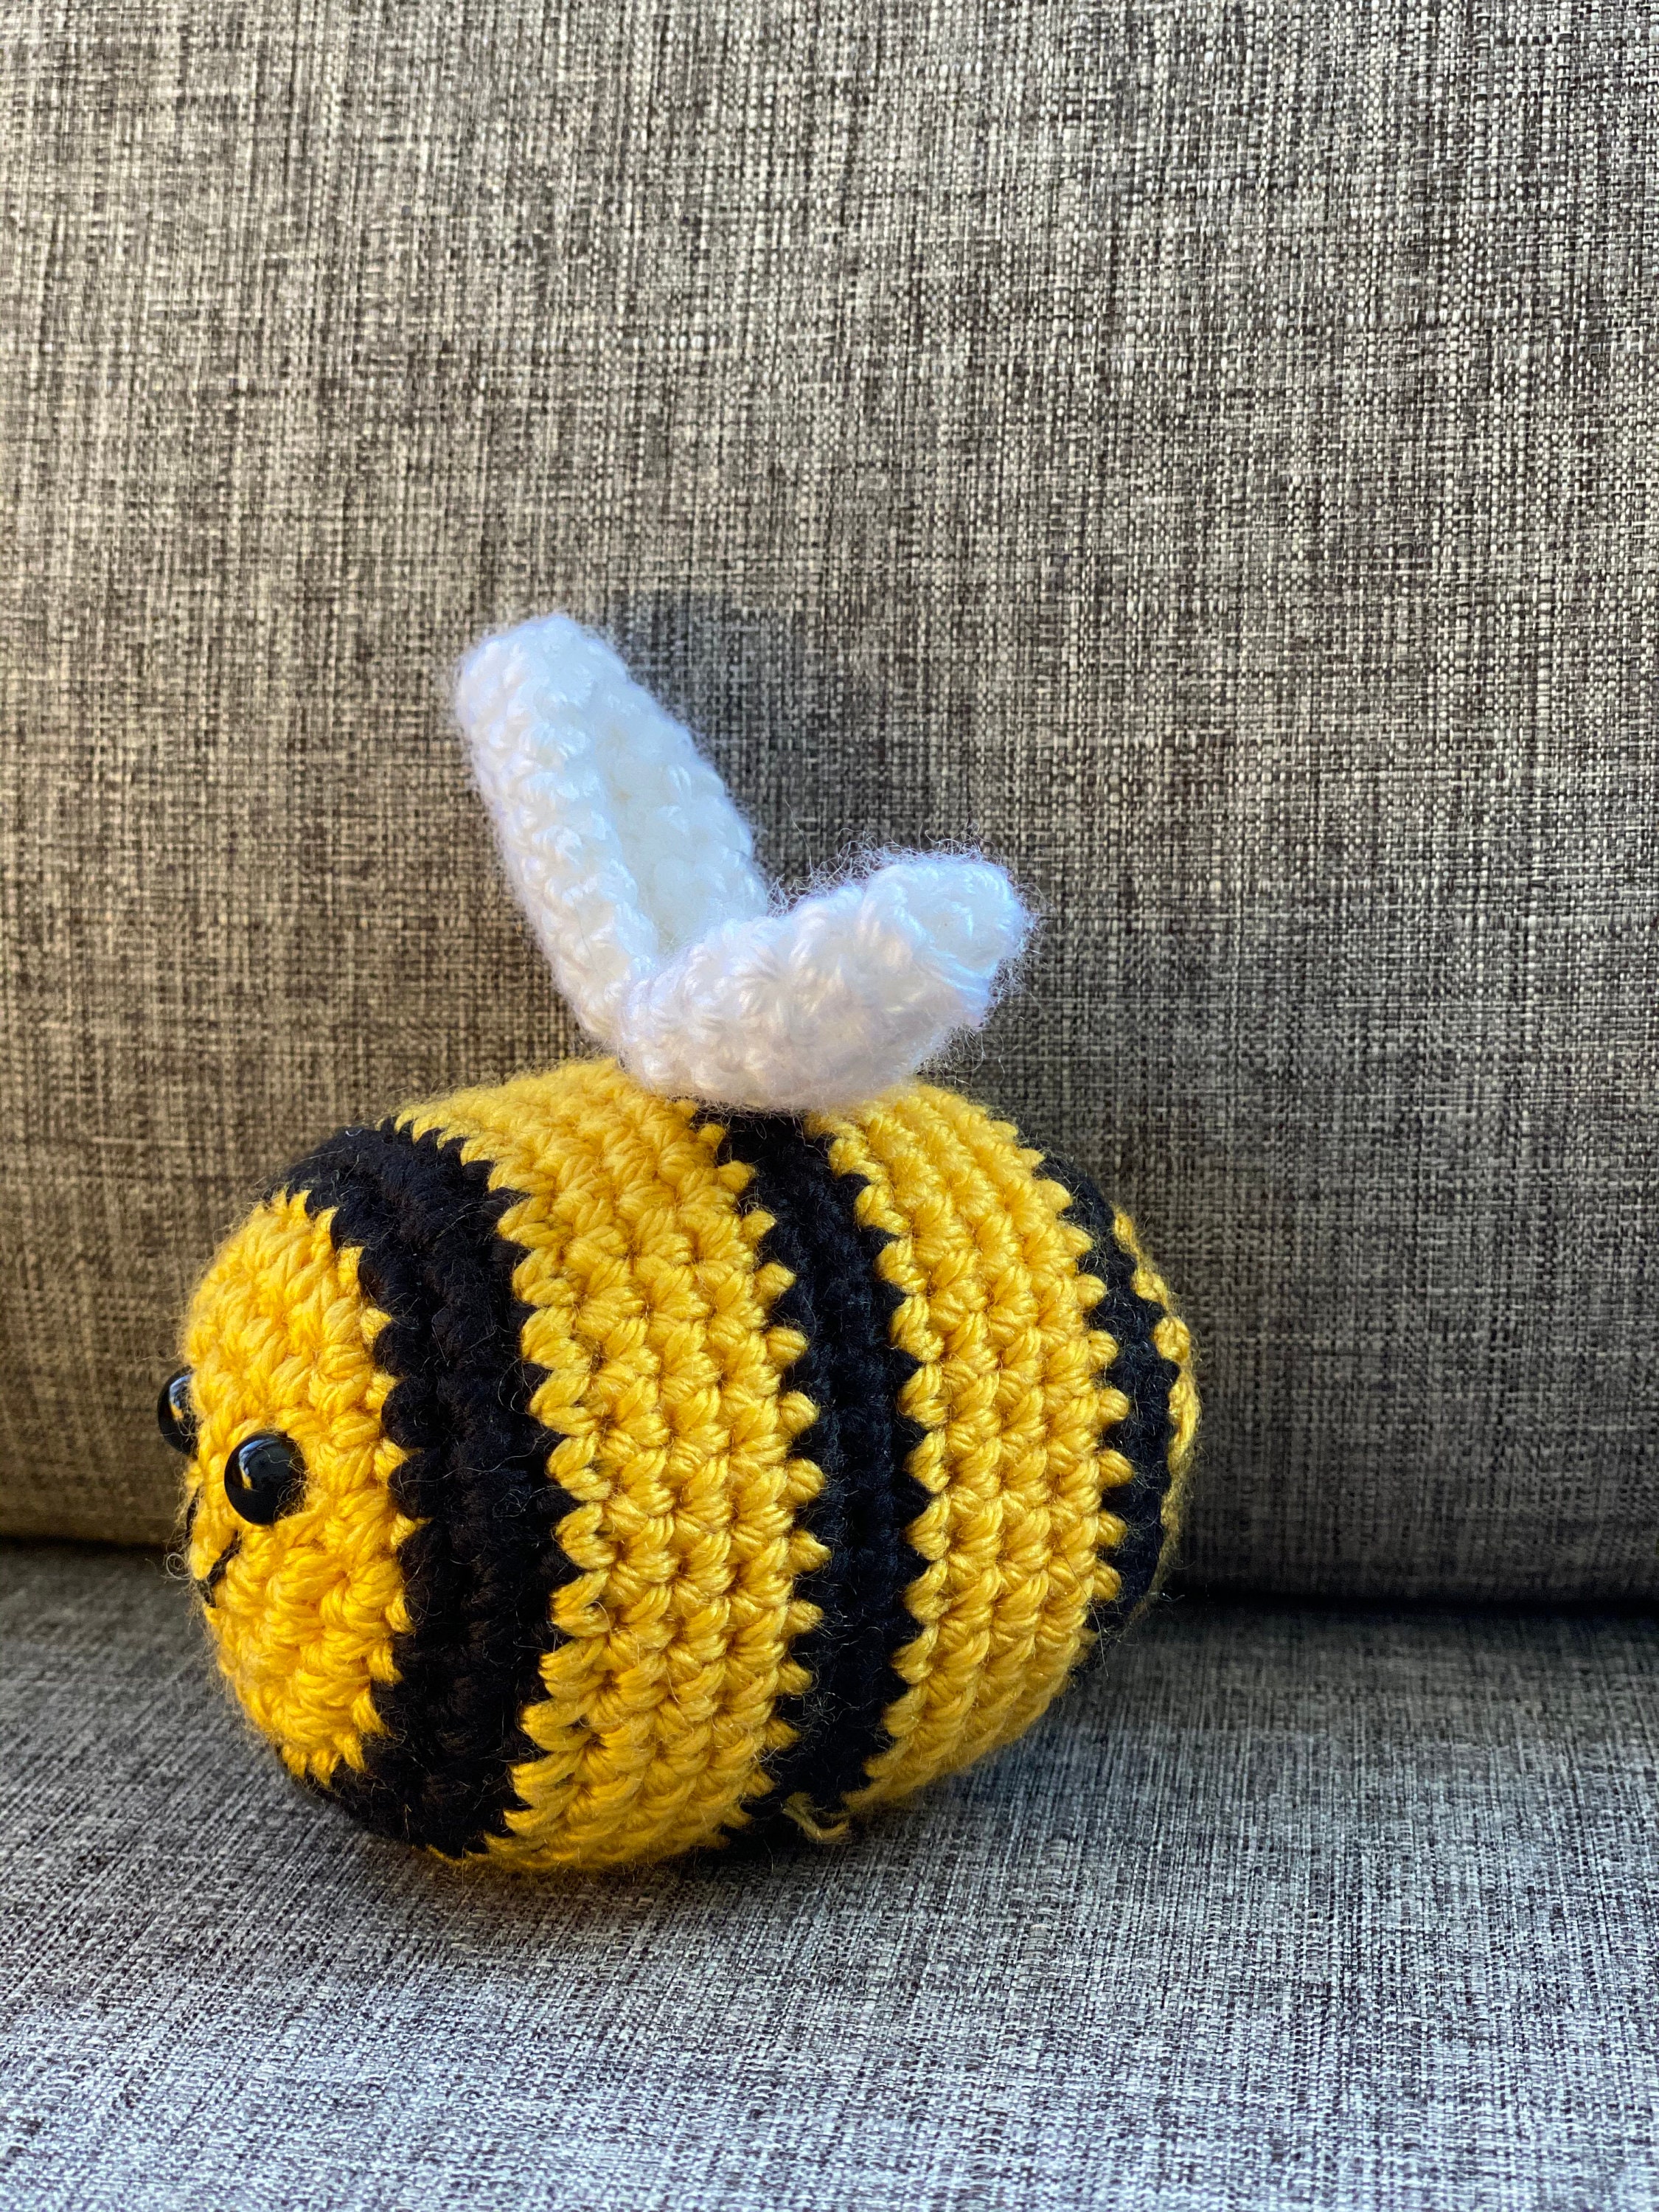 Crochet Pattern Bumble Bee Plushie Step by Step Instructional - Etsy UK